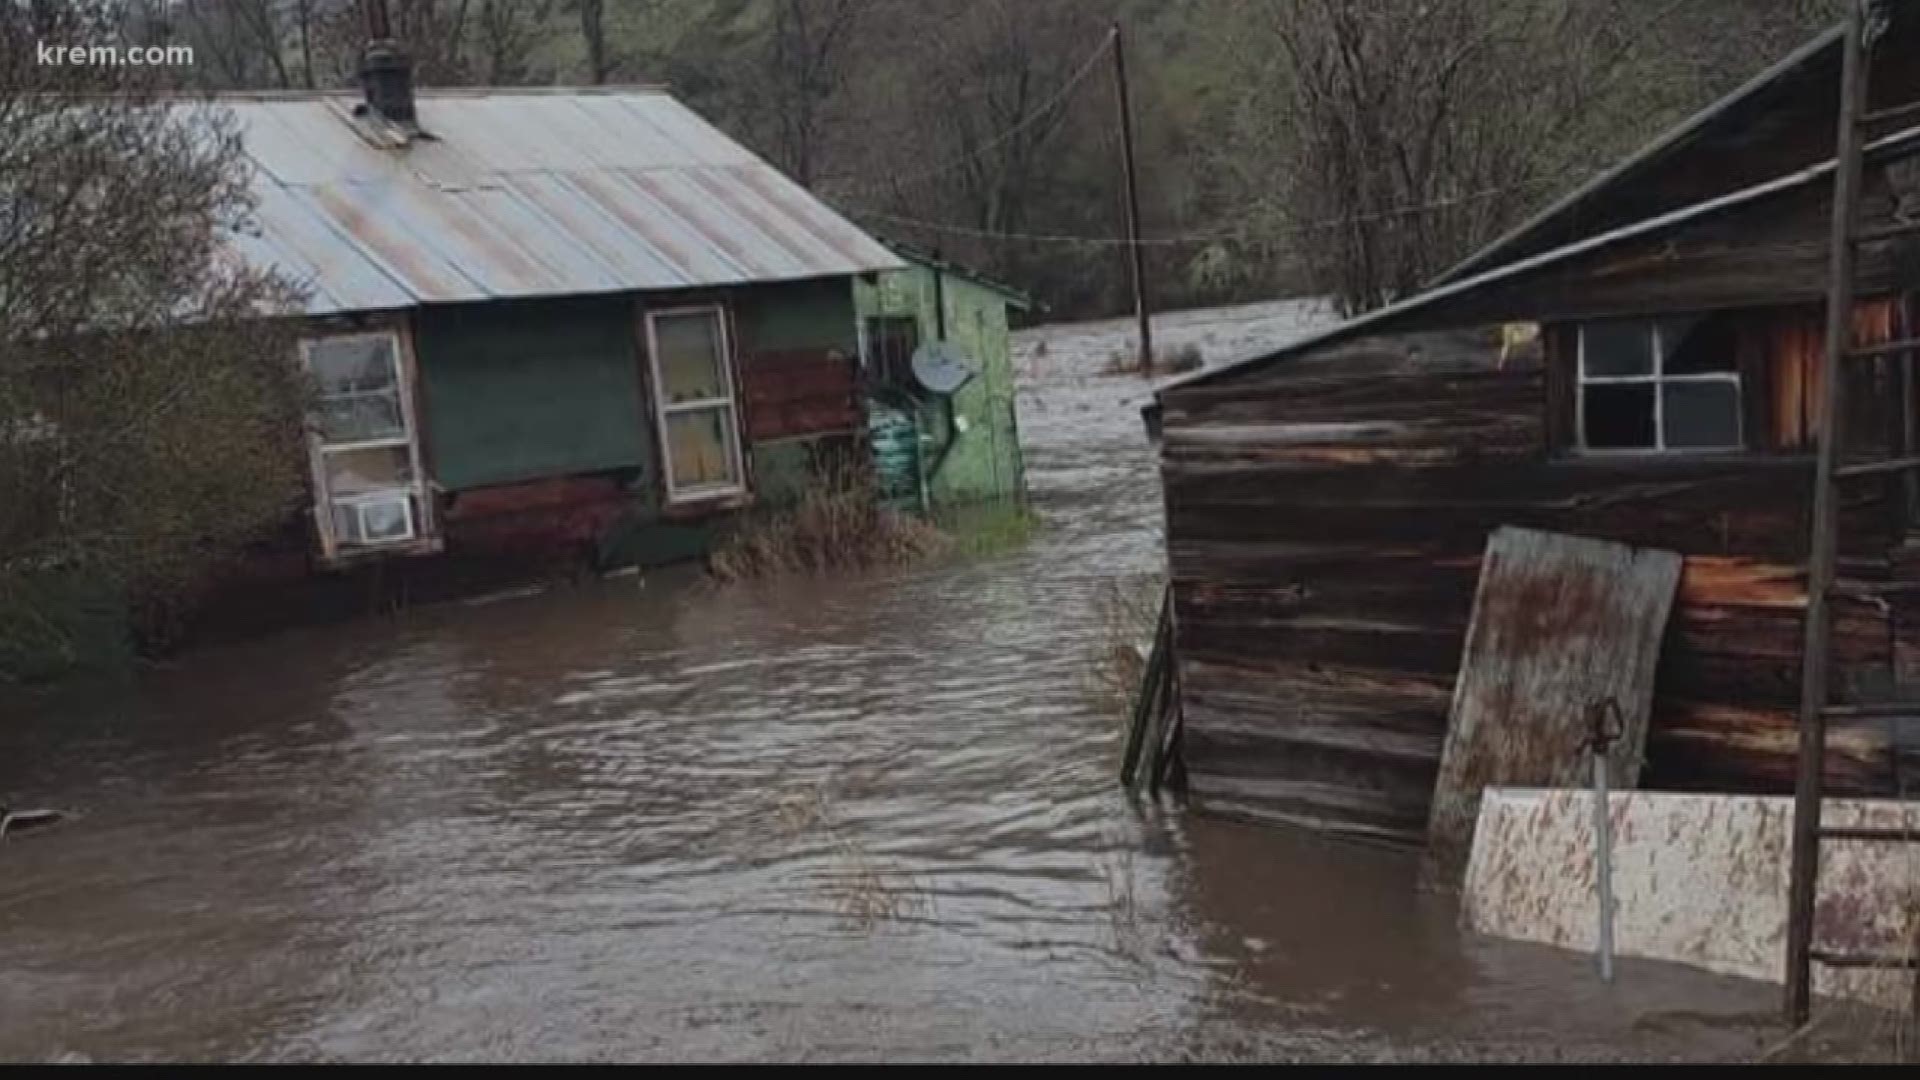 Cities in Idaho and Lewis Counties are facing flooding and road closures as the Clearwater River rises to record levels in the area.